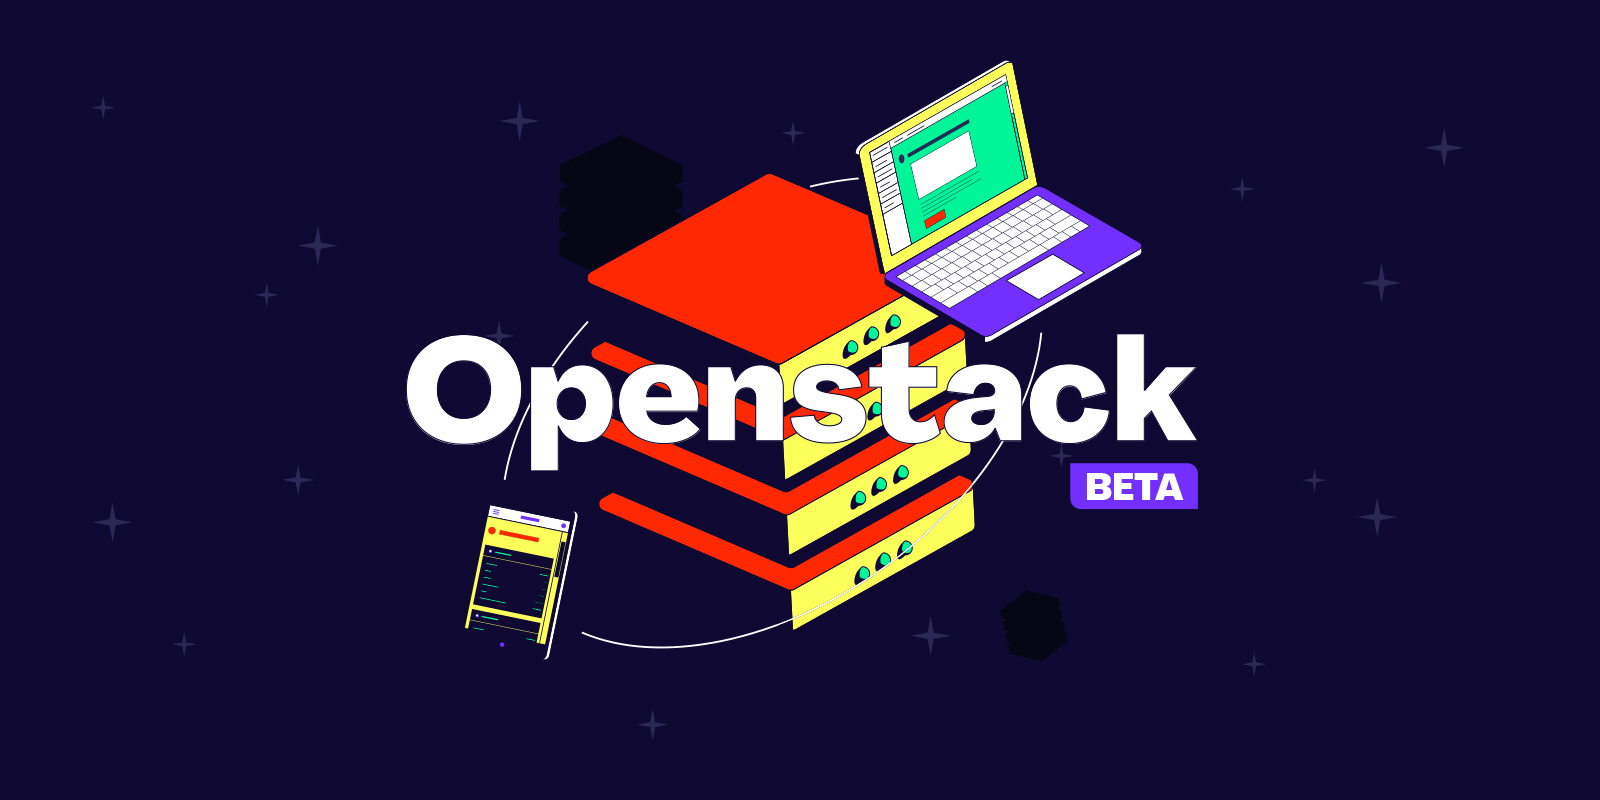 Test our new OpenStack based servers in Beta